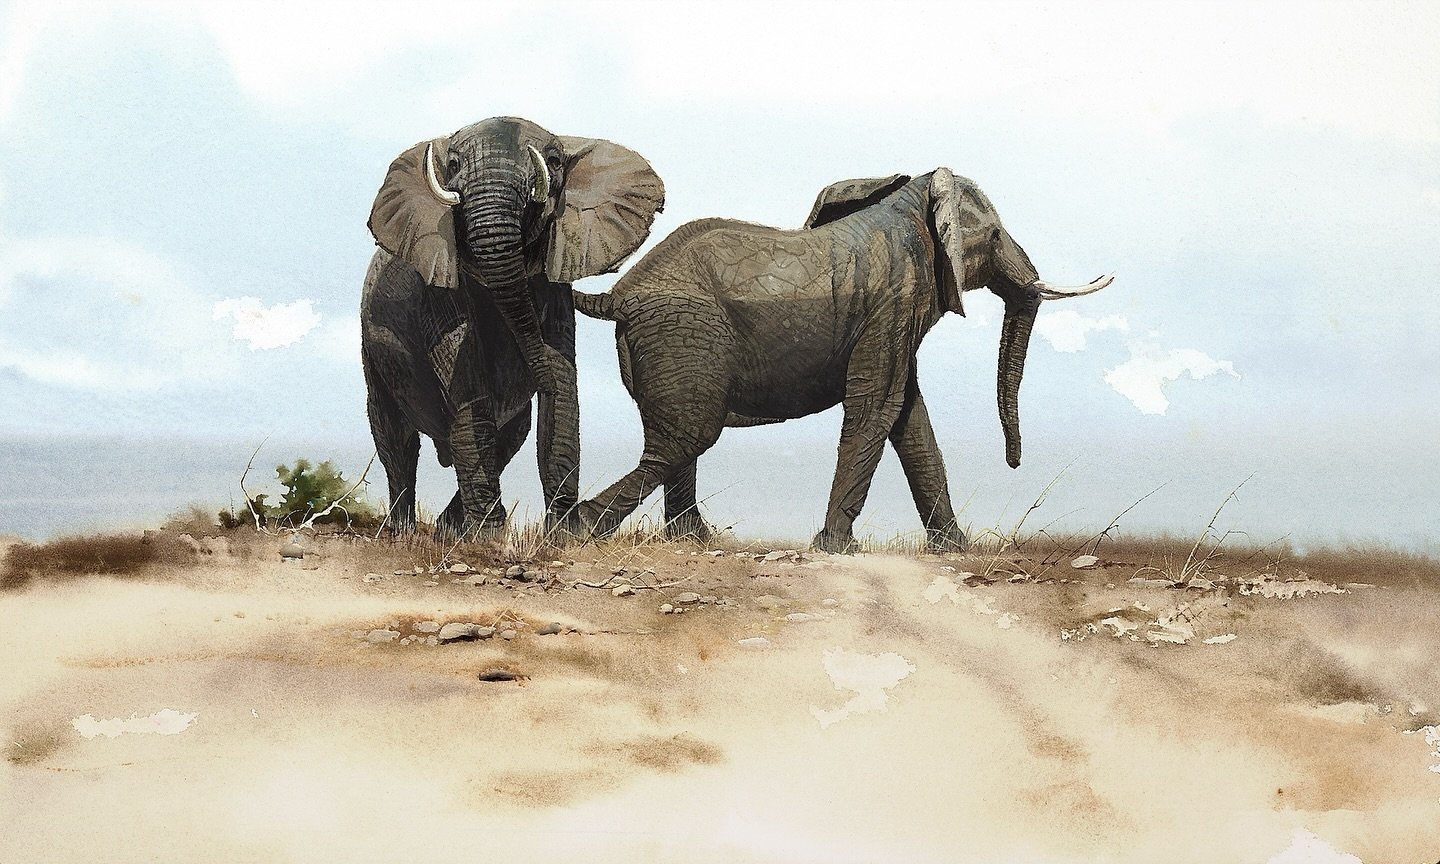 A startled stroll
A splash of watercolor paint captures unexpected in the bush. Two young bachelor elephants, their usual carefree swagger replaced by alarm, navigate a well-worn path. One raises his head, ears flared, assessing the unseen threat. Th